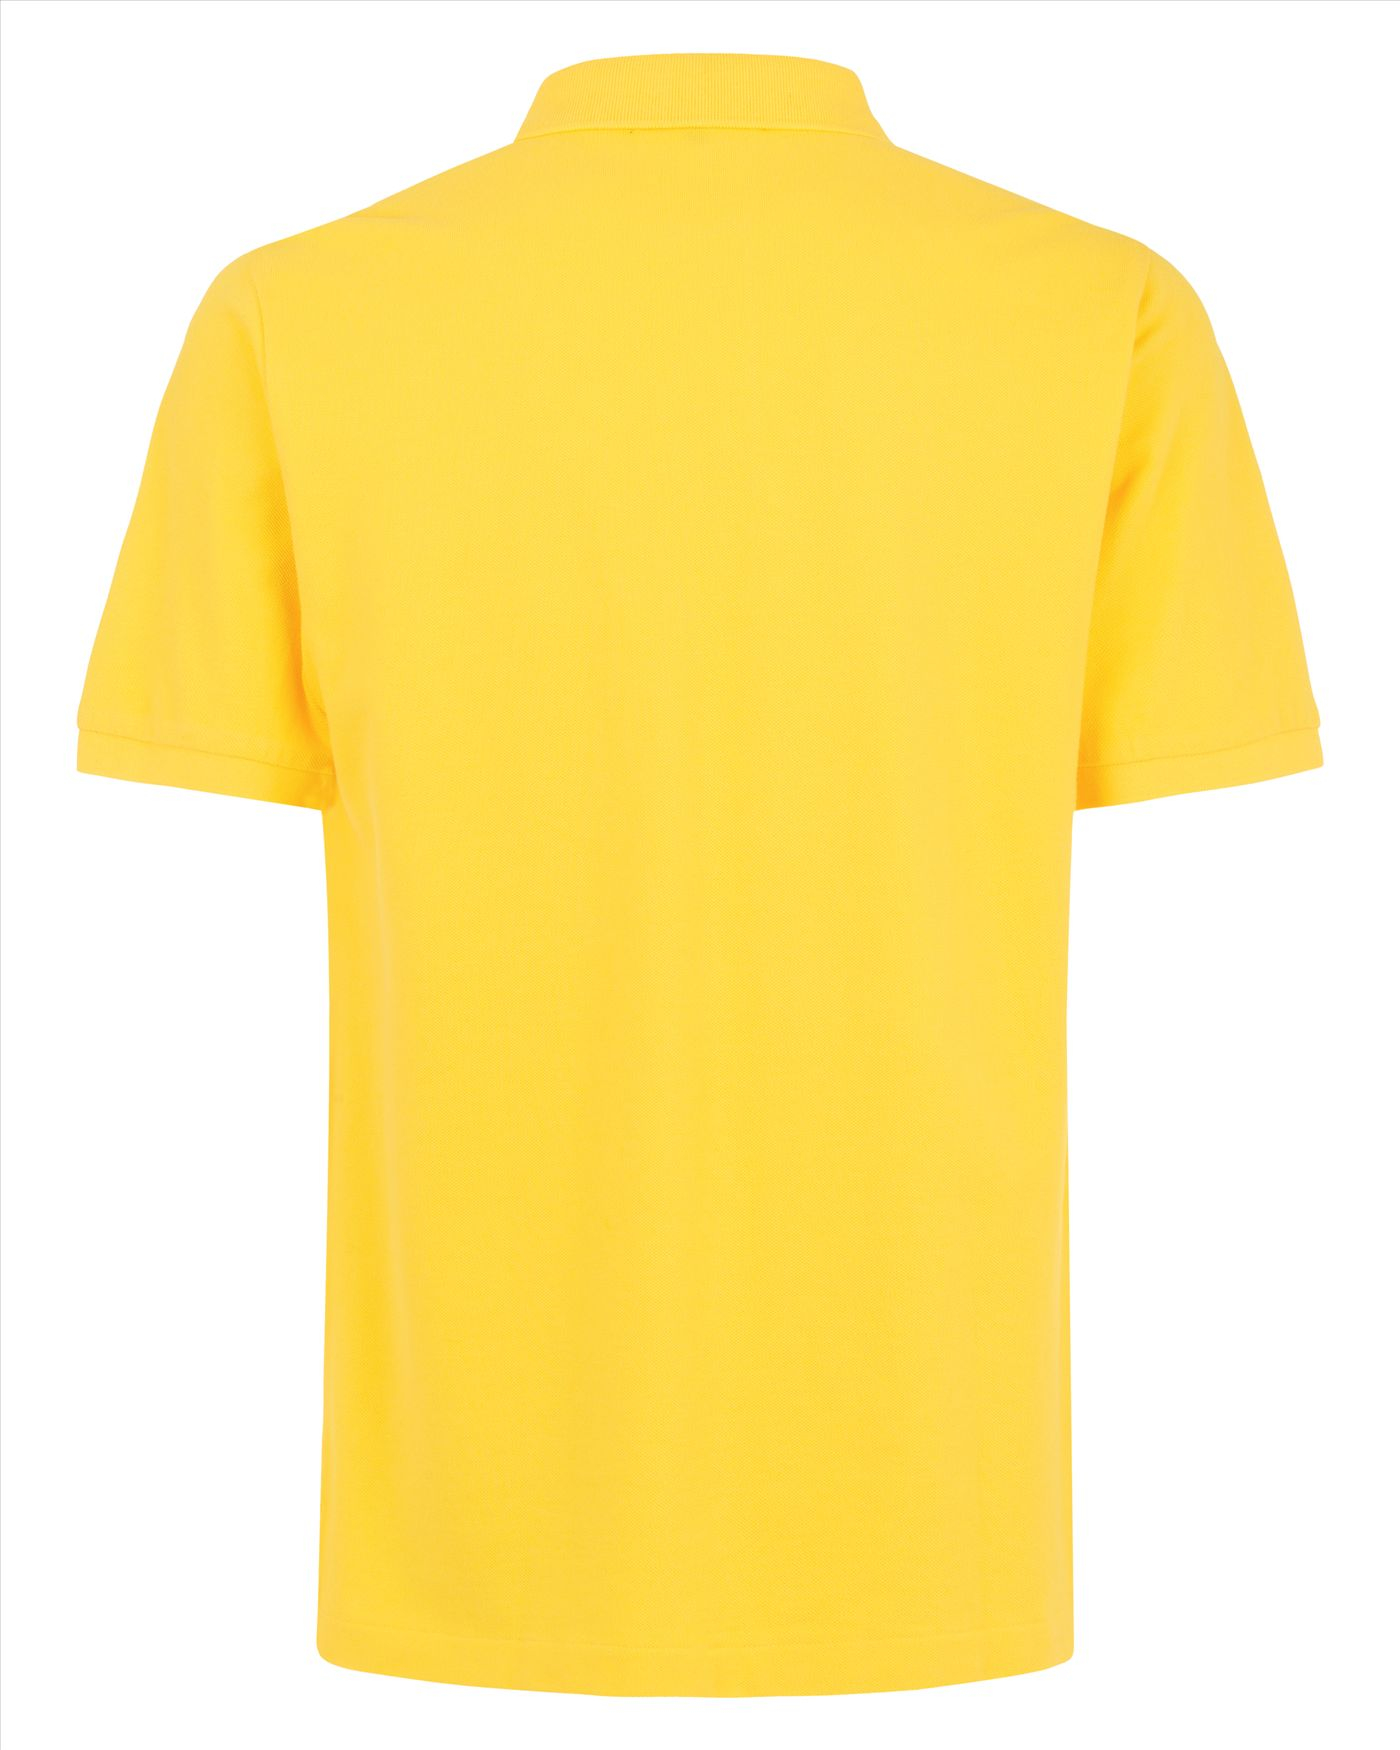 Lyst - Jaeger Plain Pique Polo Shirt in Yellow for Men